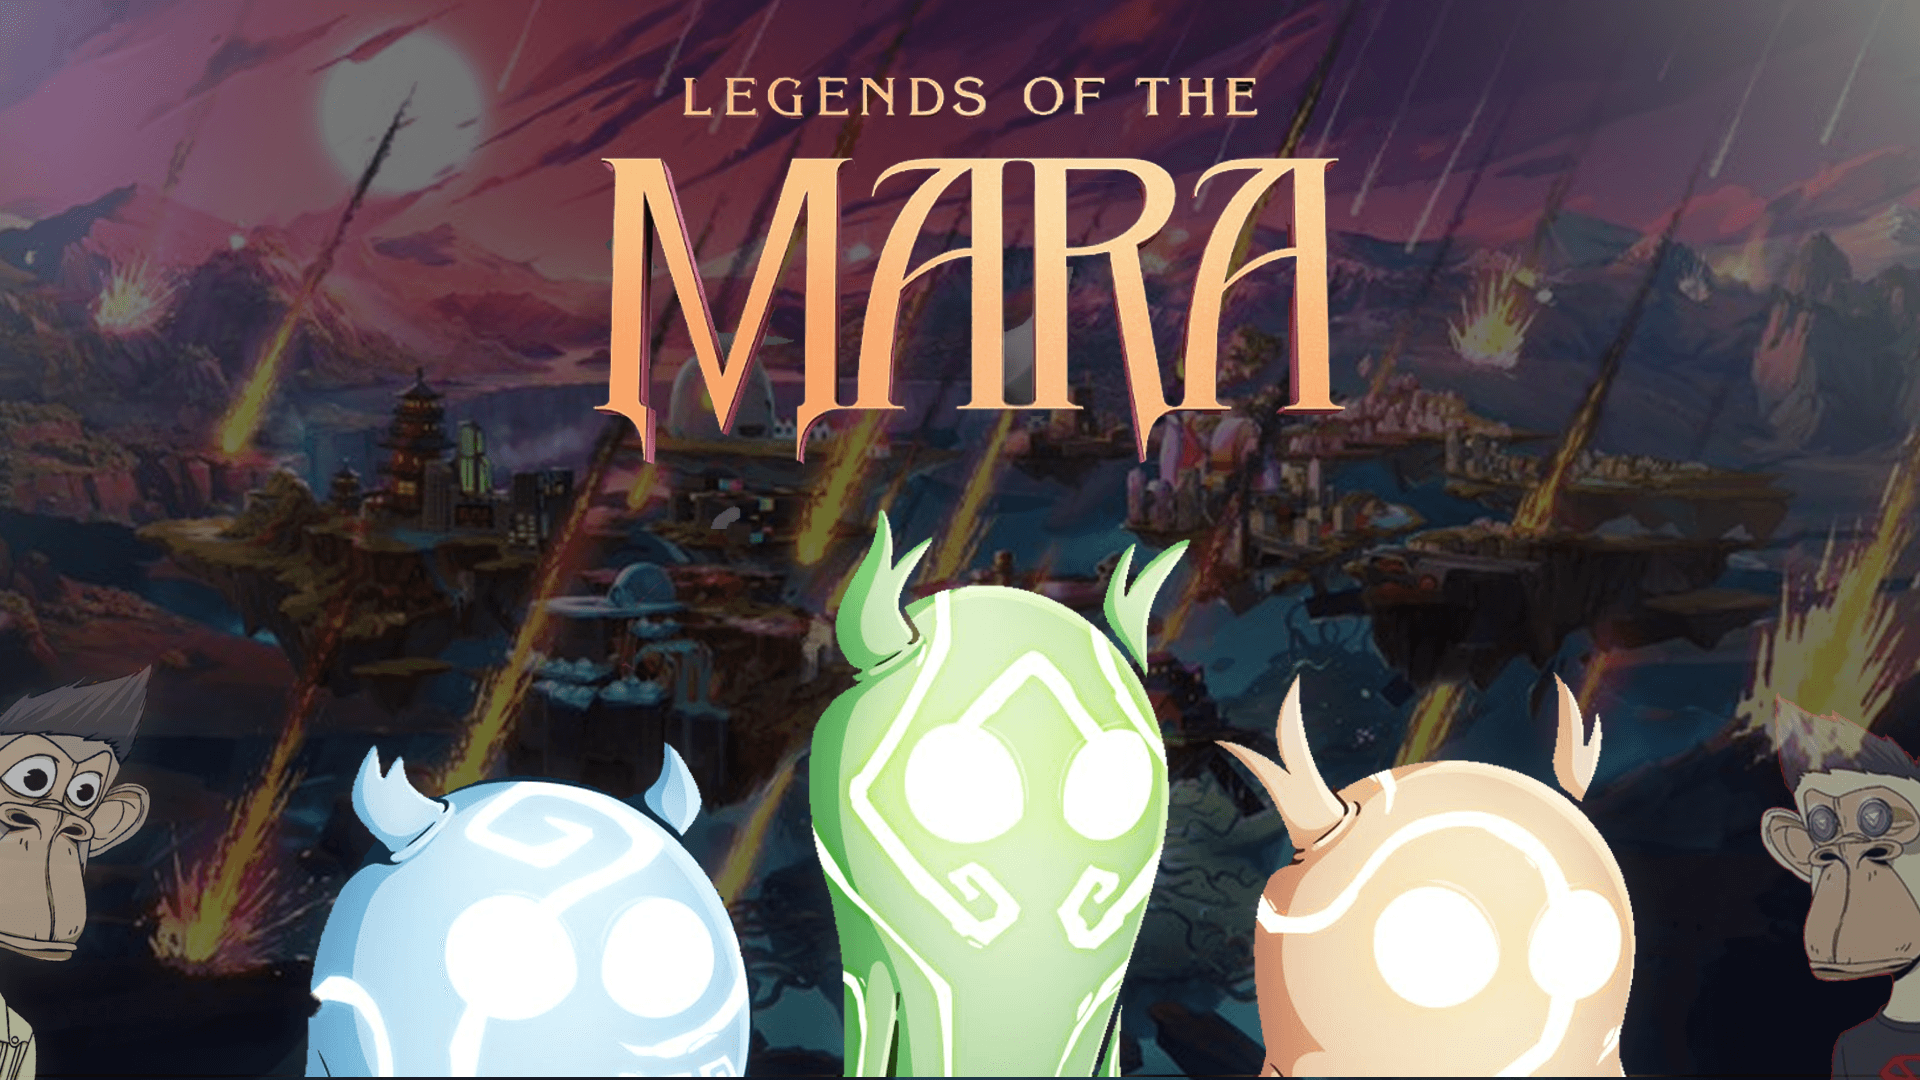 legends of the mara game image 1.png